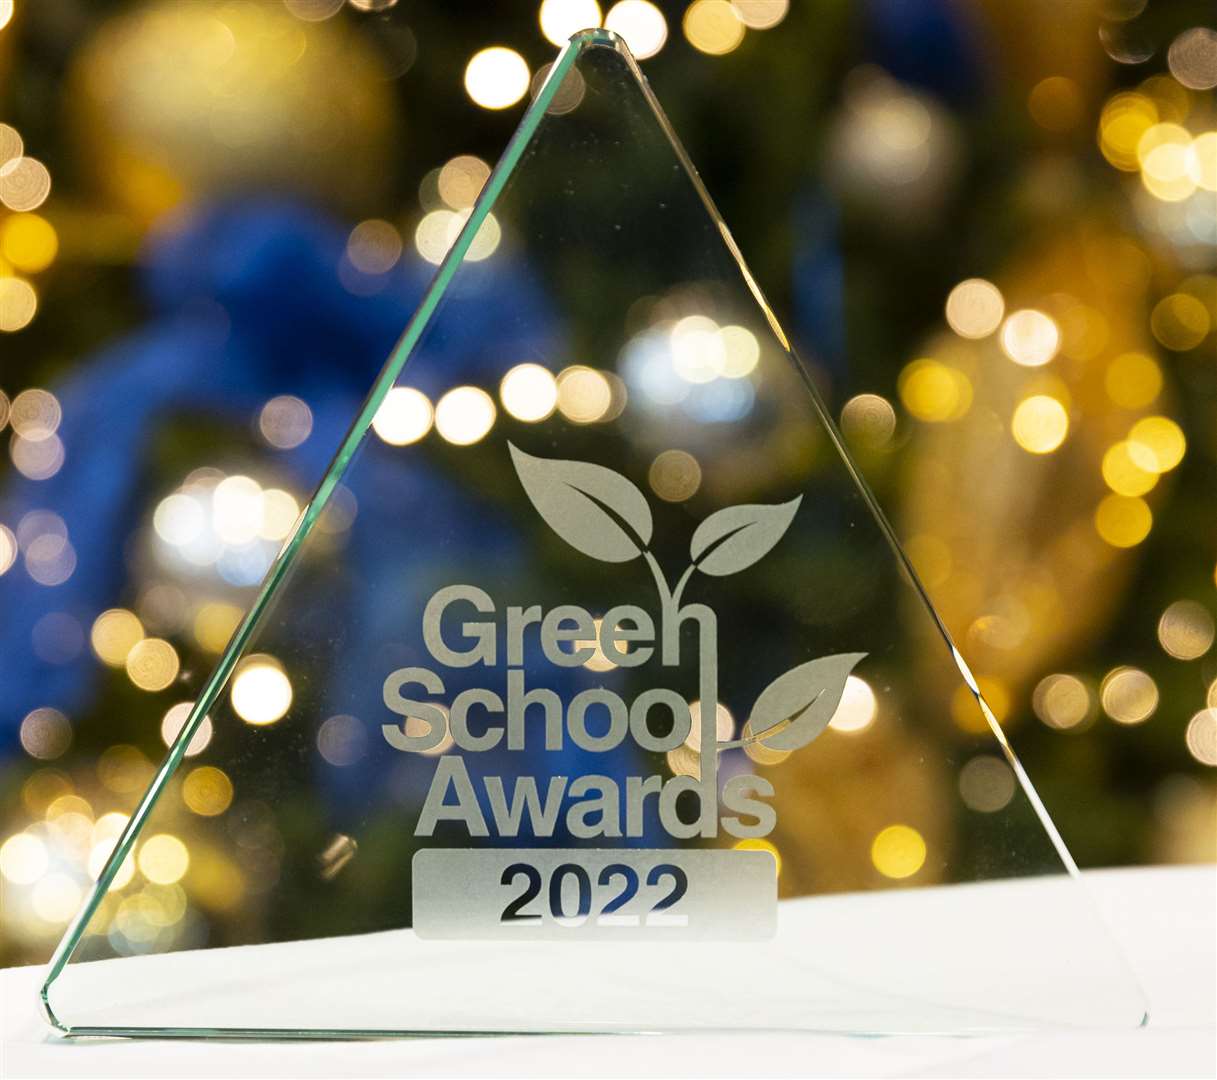 The awards are given to schools that have undertaken projects or initiatives that help the environment. Picture: Martin Apps